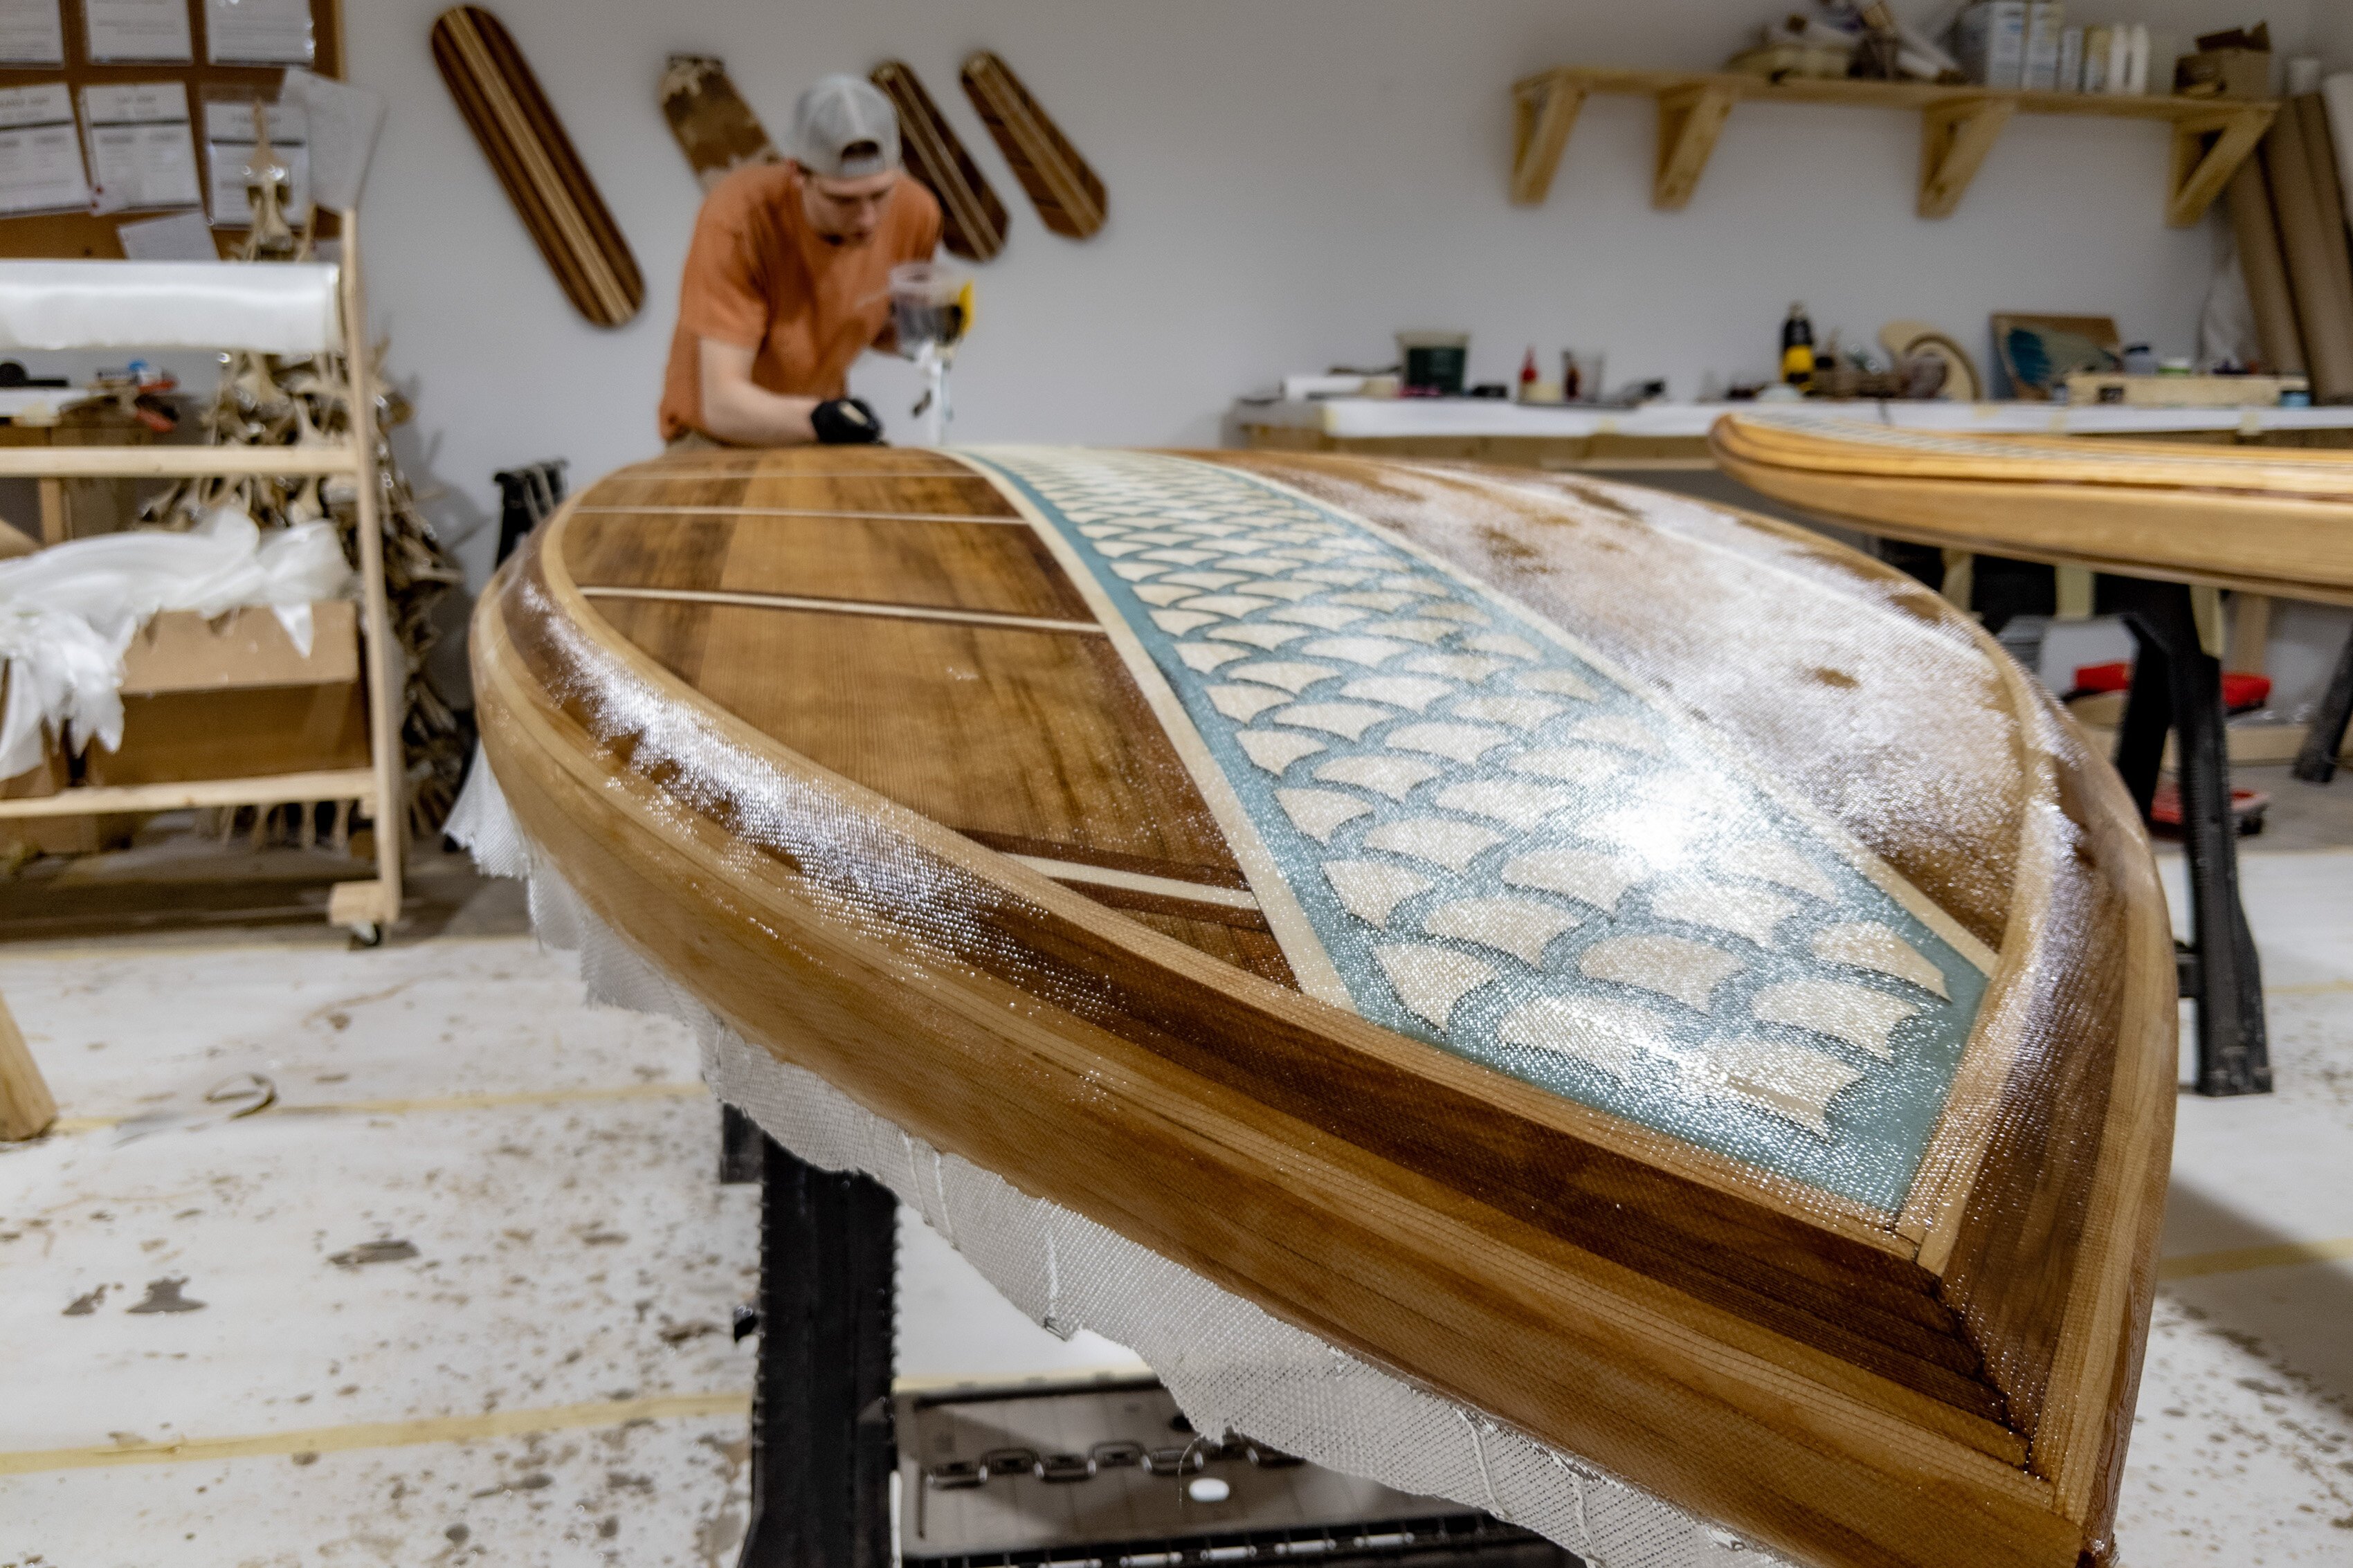 A paddleboard craftsman in action at Little Bay Boards.